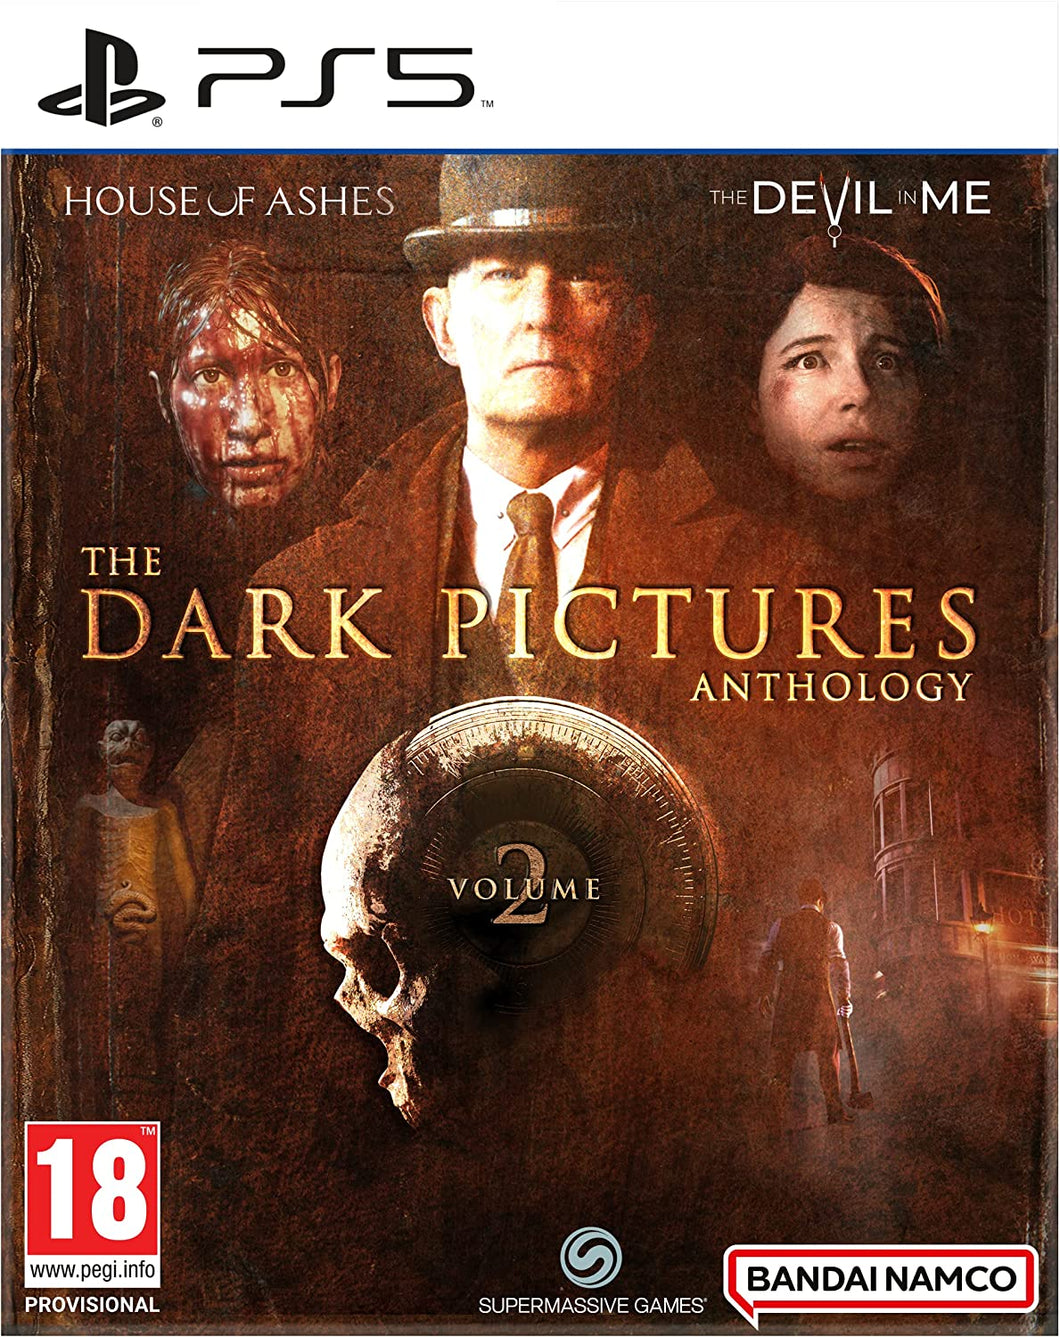 SONY PS5 GAME THE DARK PICTURES: VOLUME 2